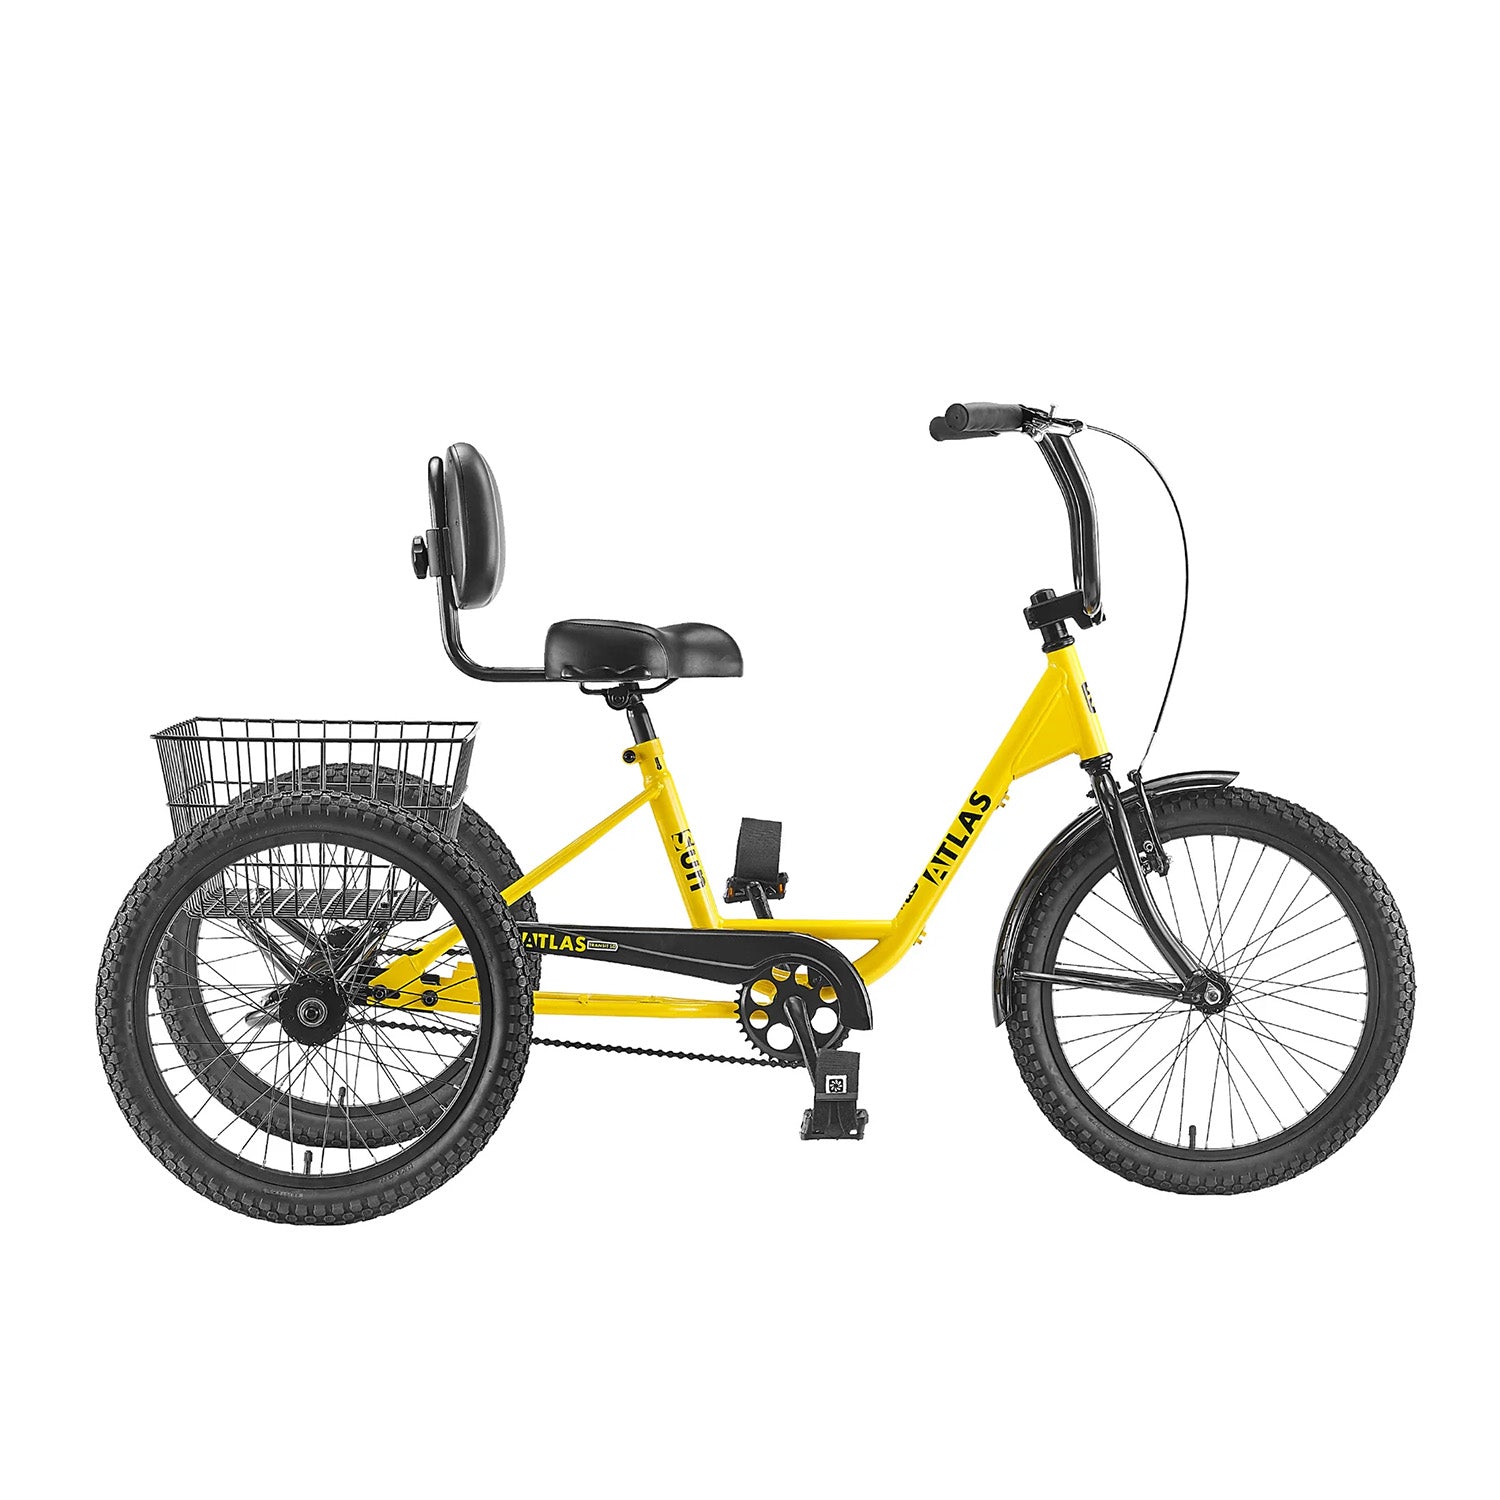 Sun Bicycle Atlas Transit SD, side view Safety Yellow, Bixby Bicycles, Oklahoma